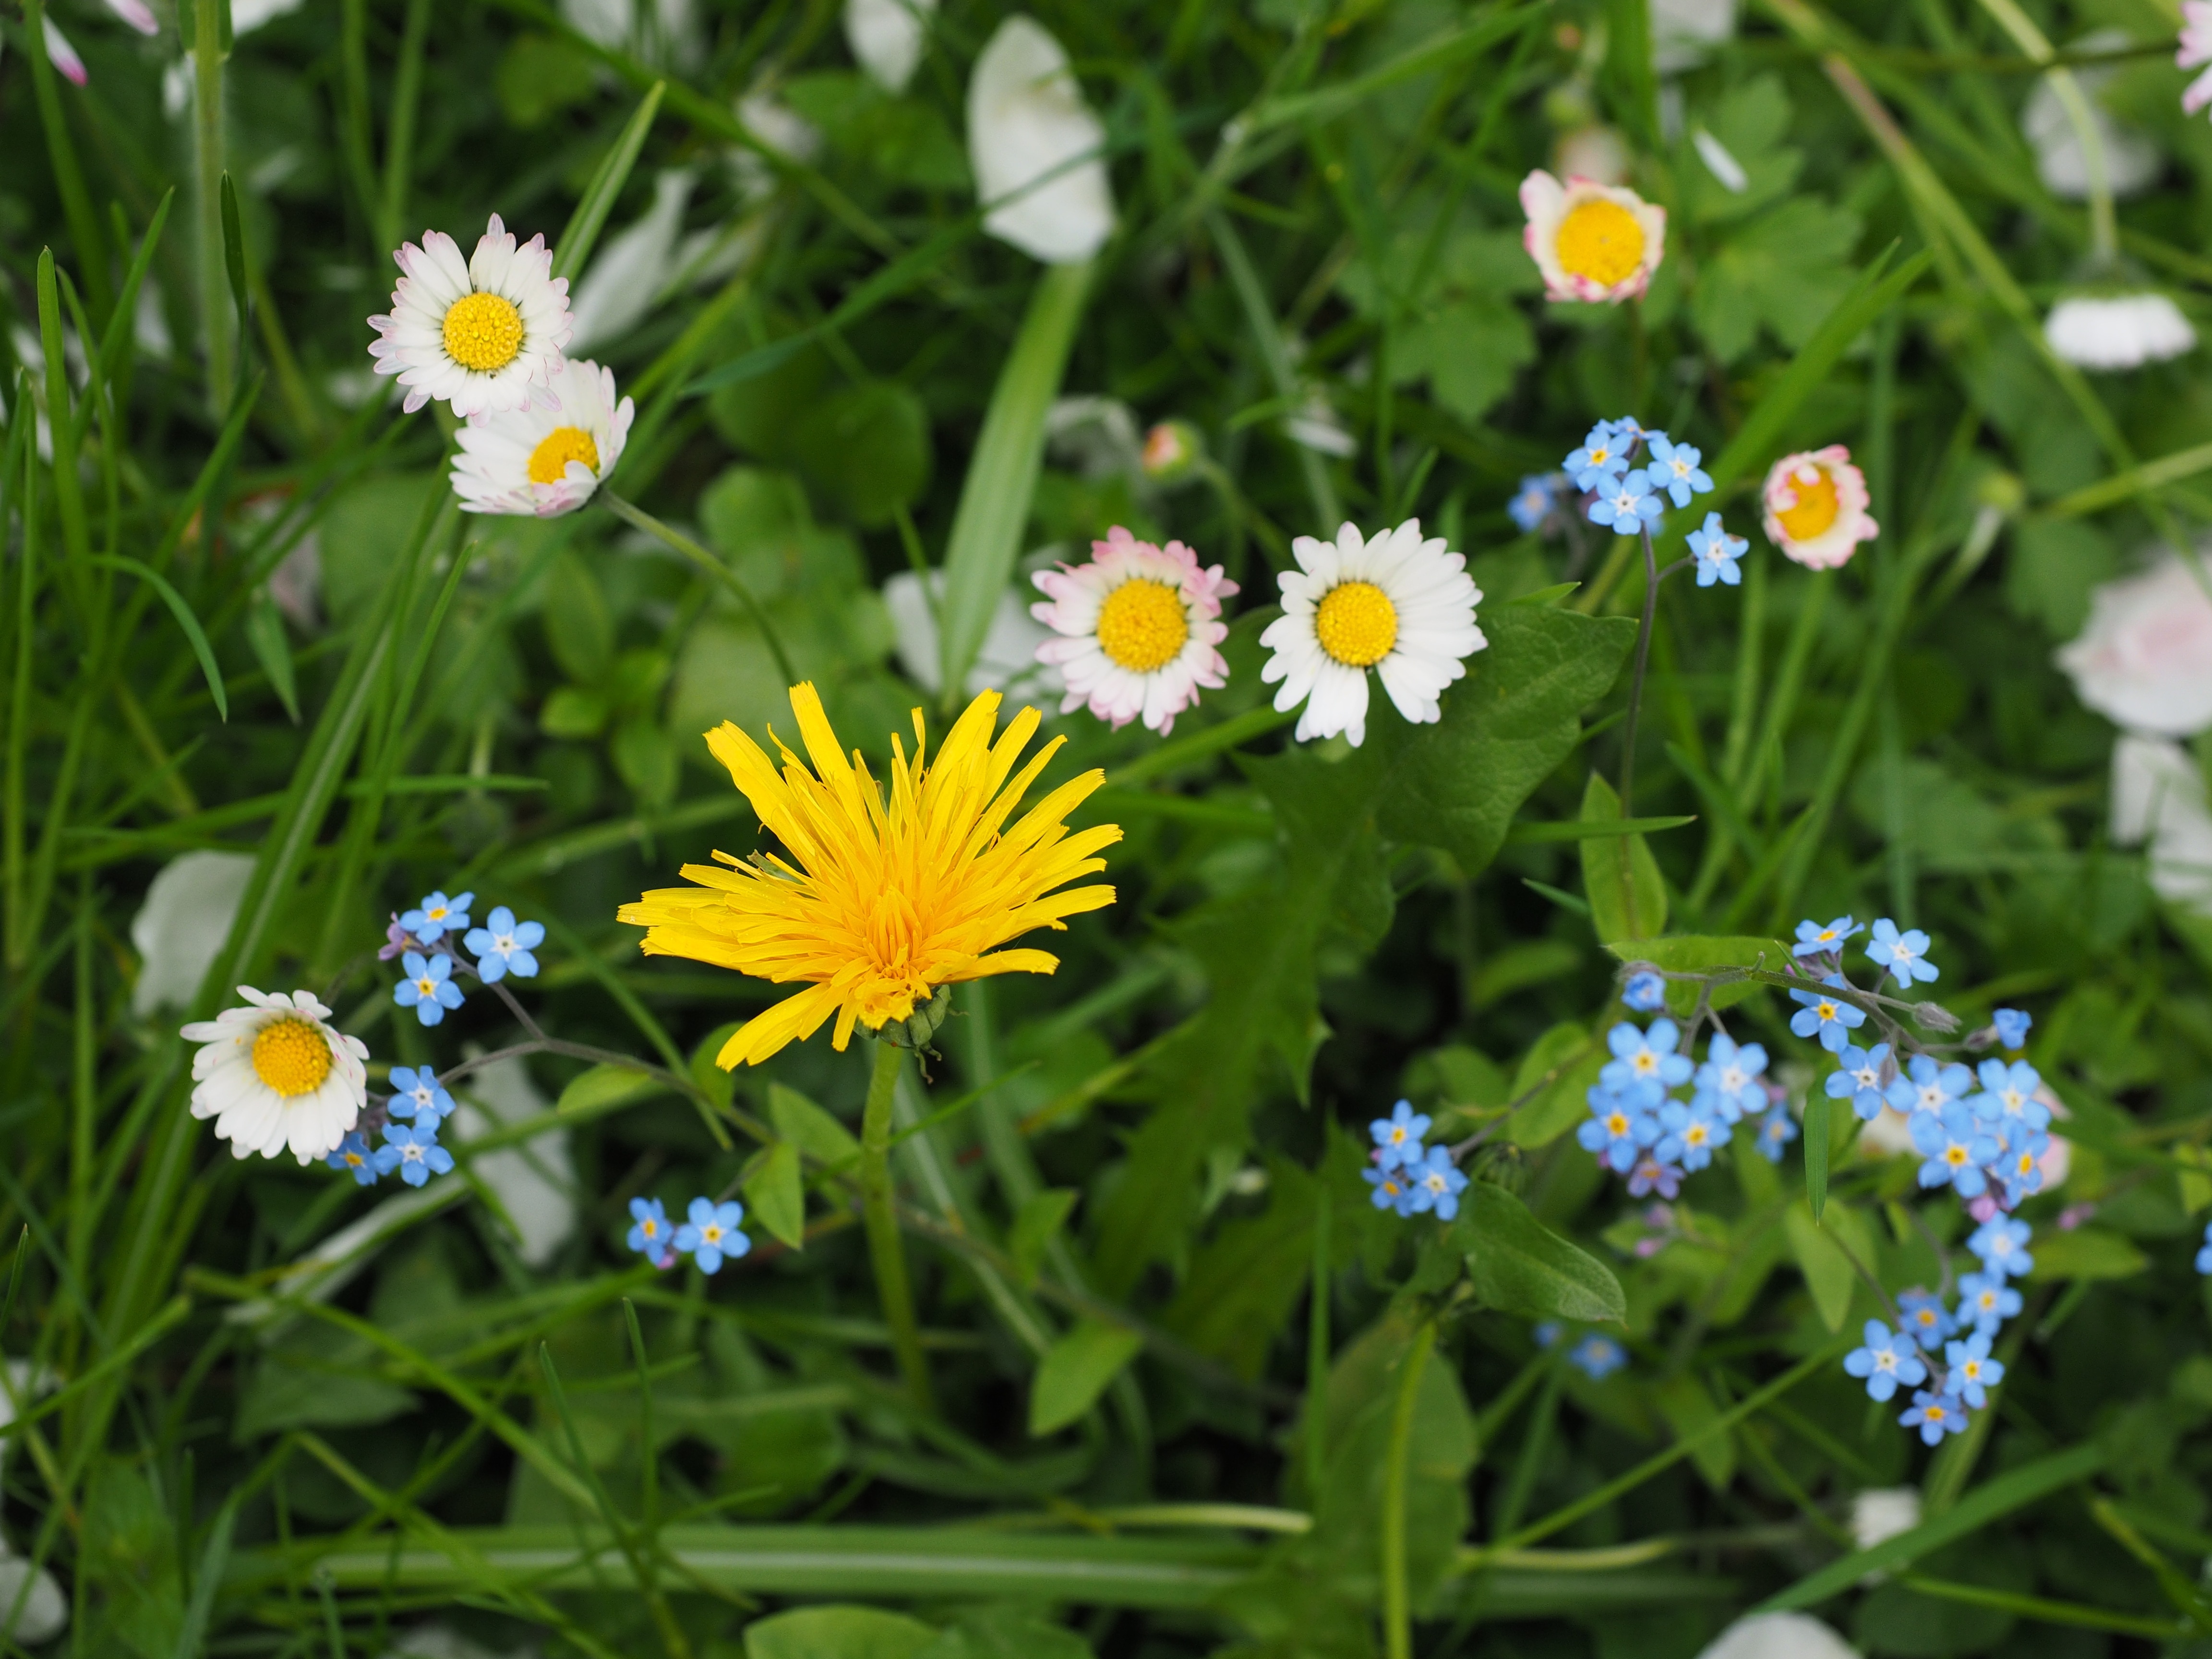 yellow-white-and-blue petal flowers